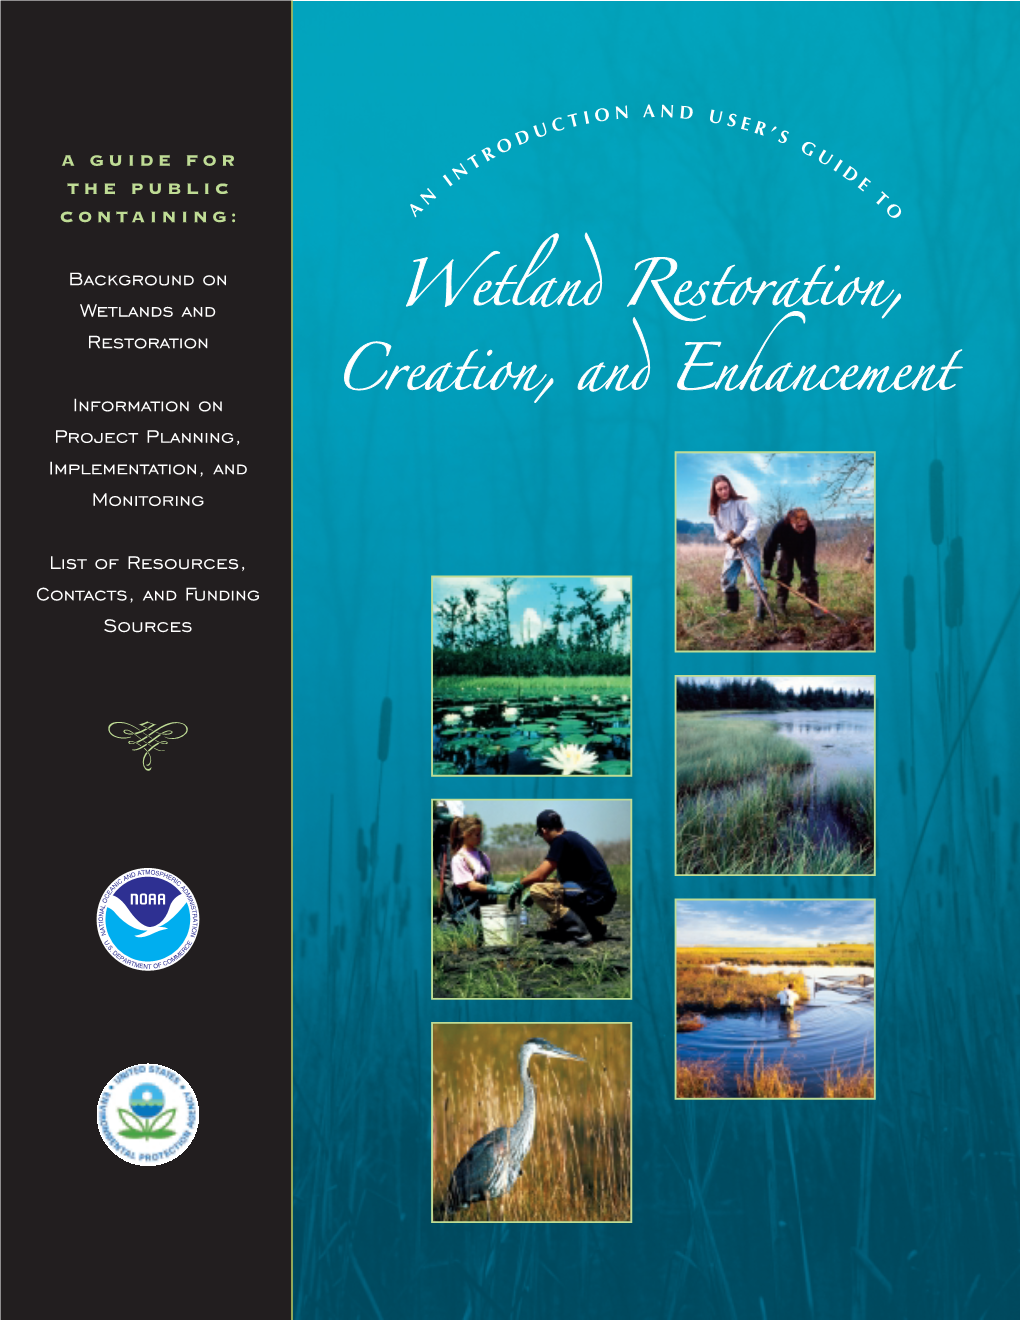 View an Introduction and User's Guide to Wetland Restoration, Creation